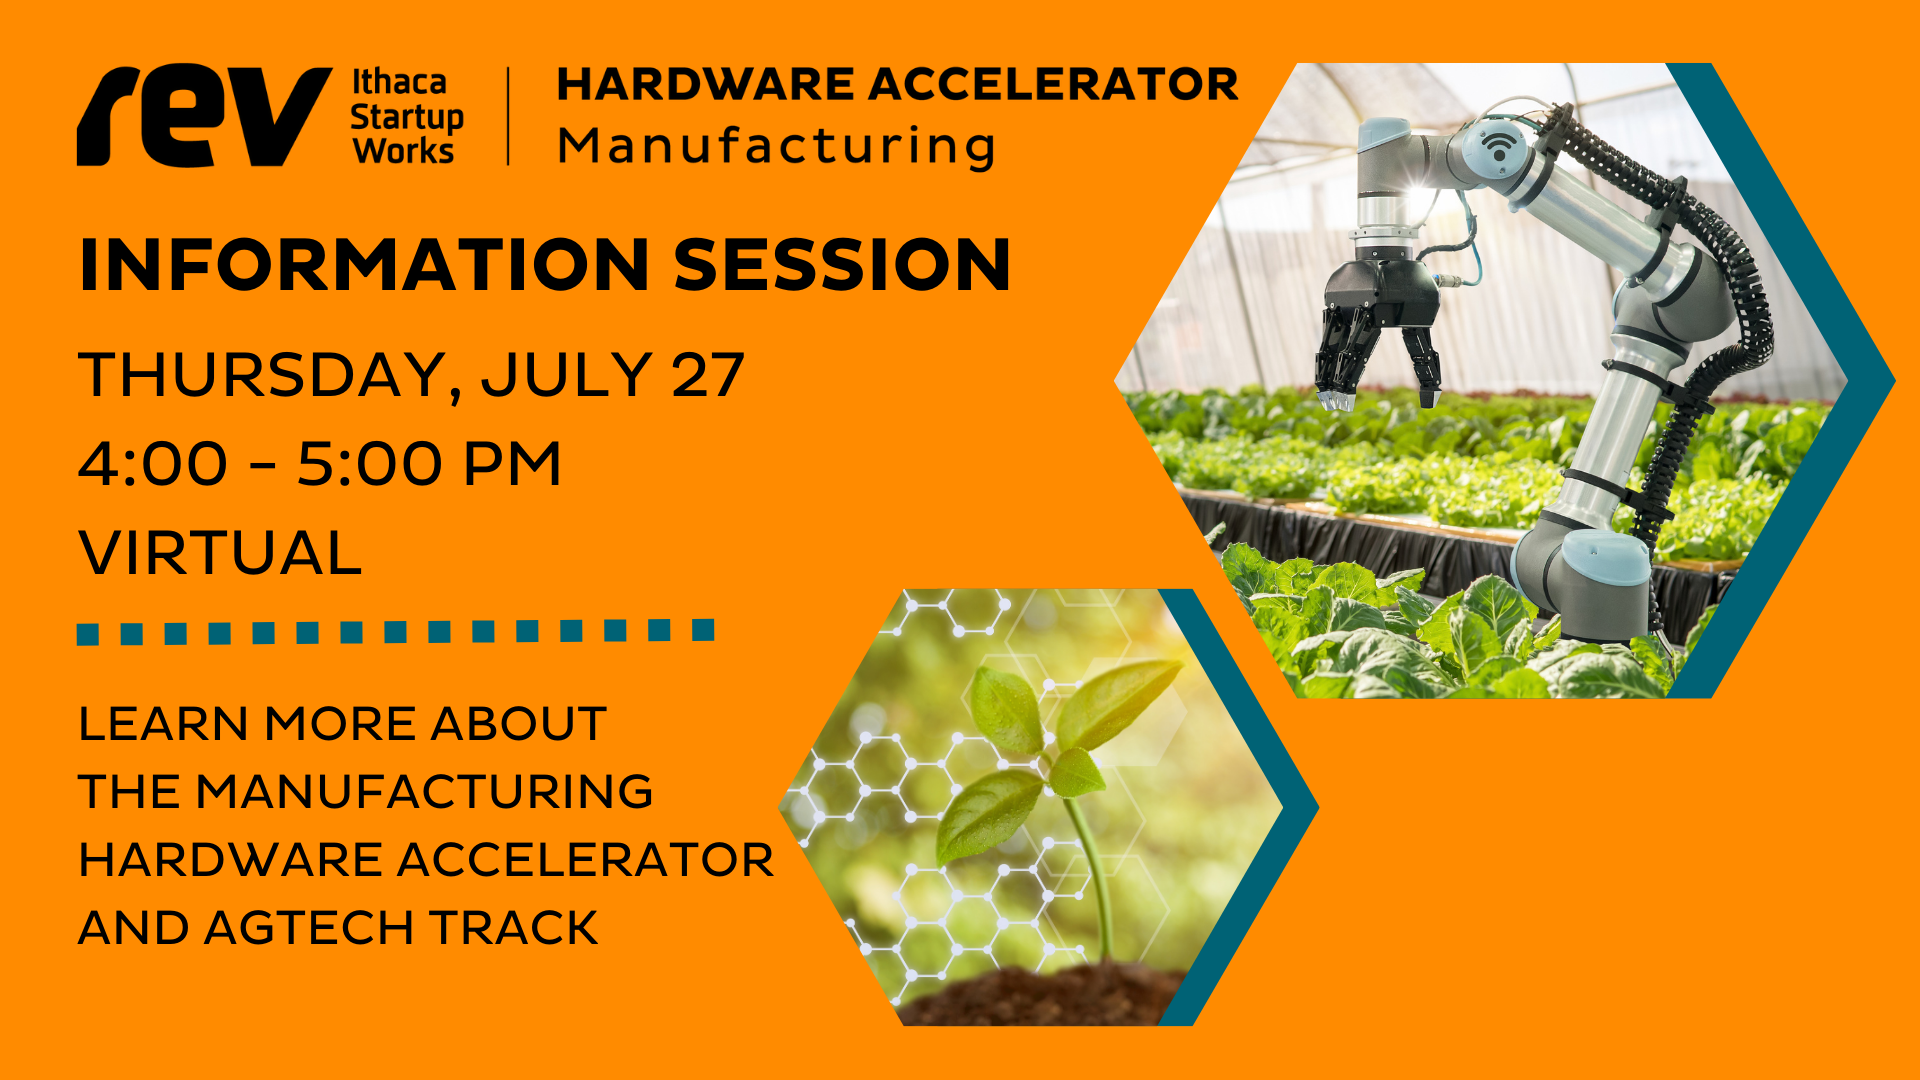 Graphic for August 27th Manufacturing Hardware Accelerator Information Session.